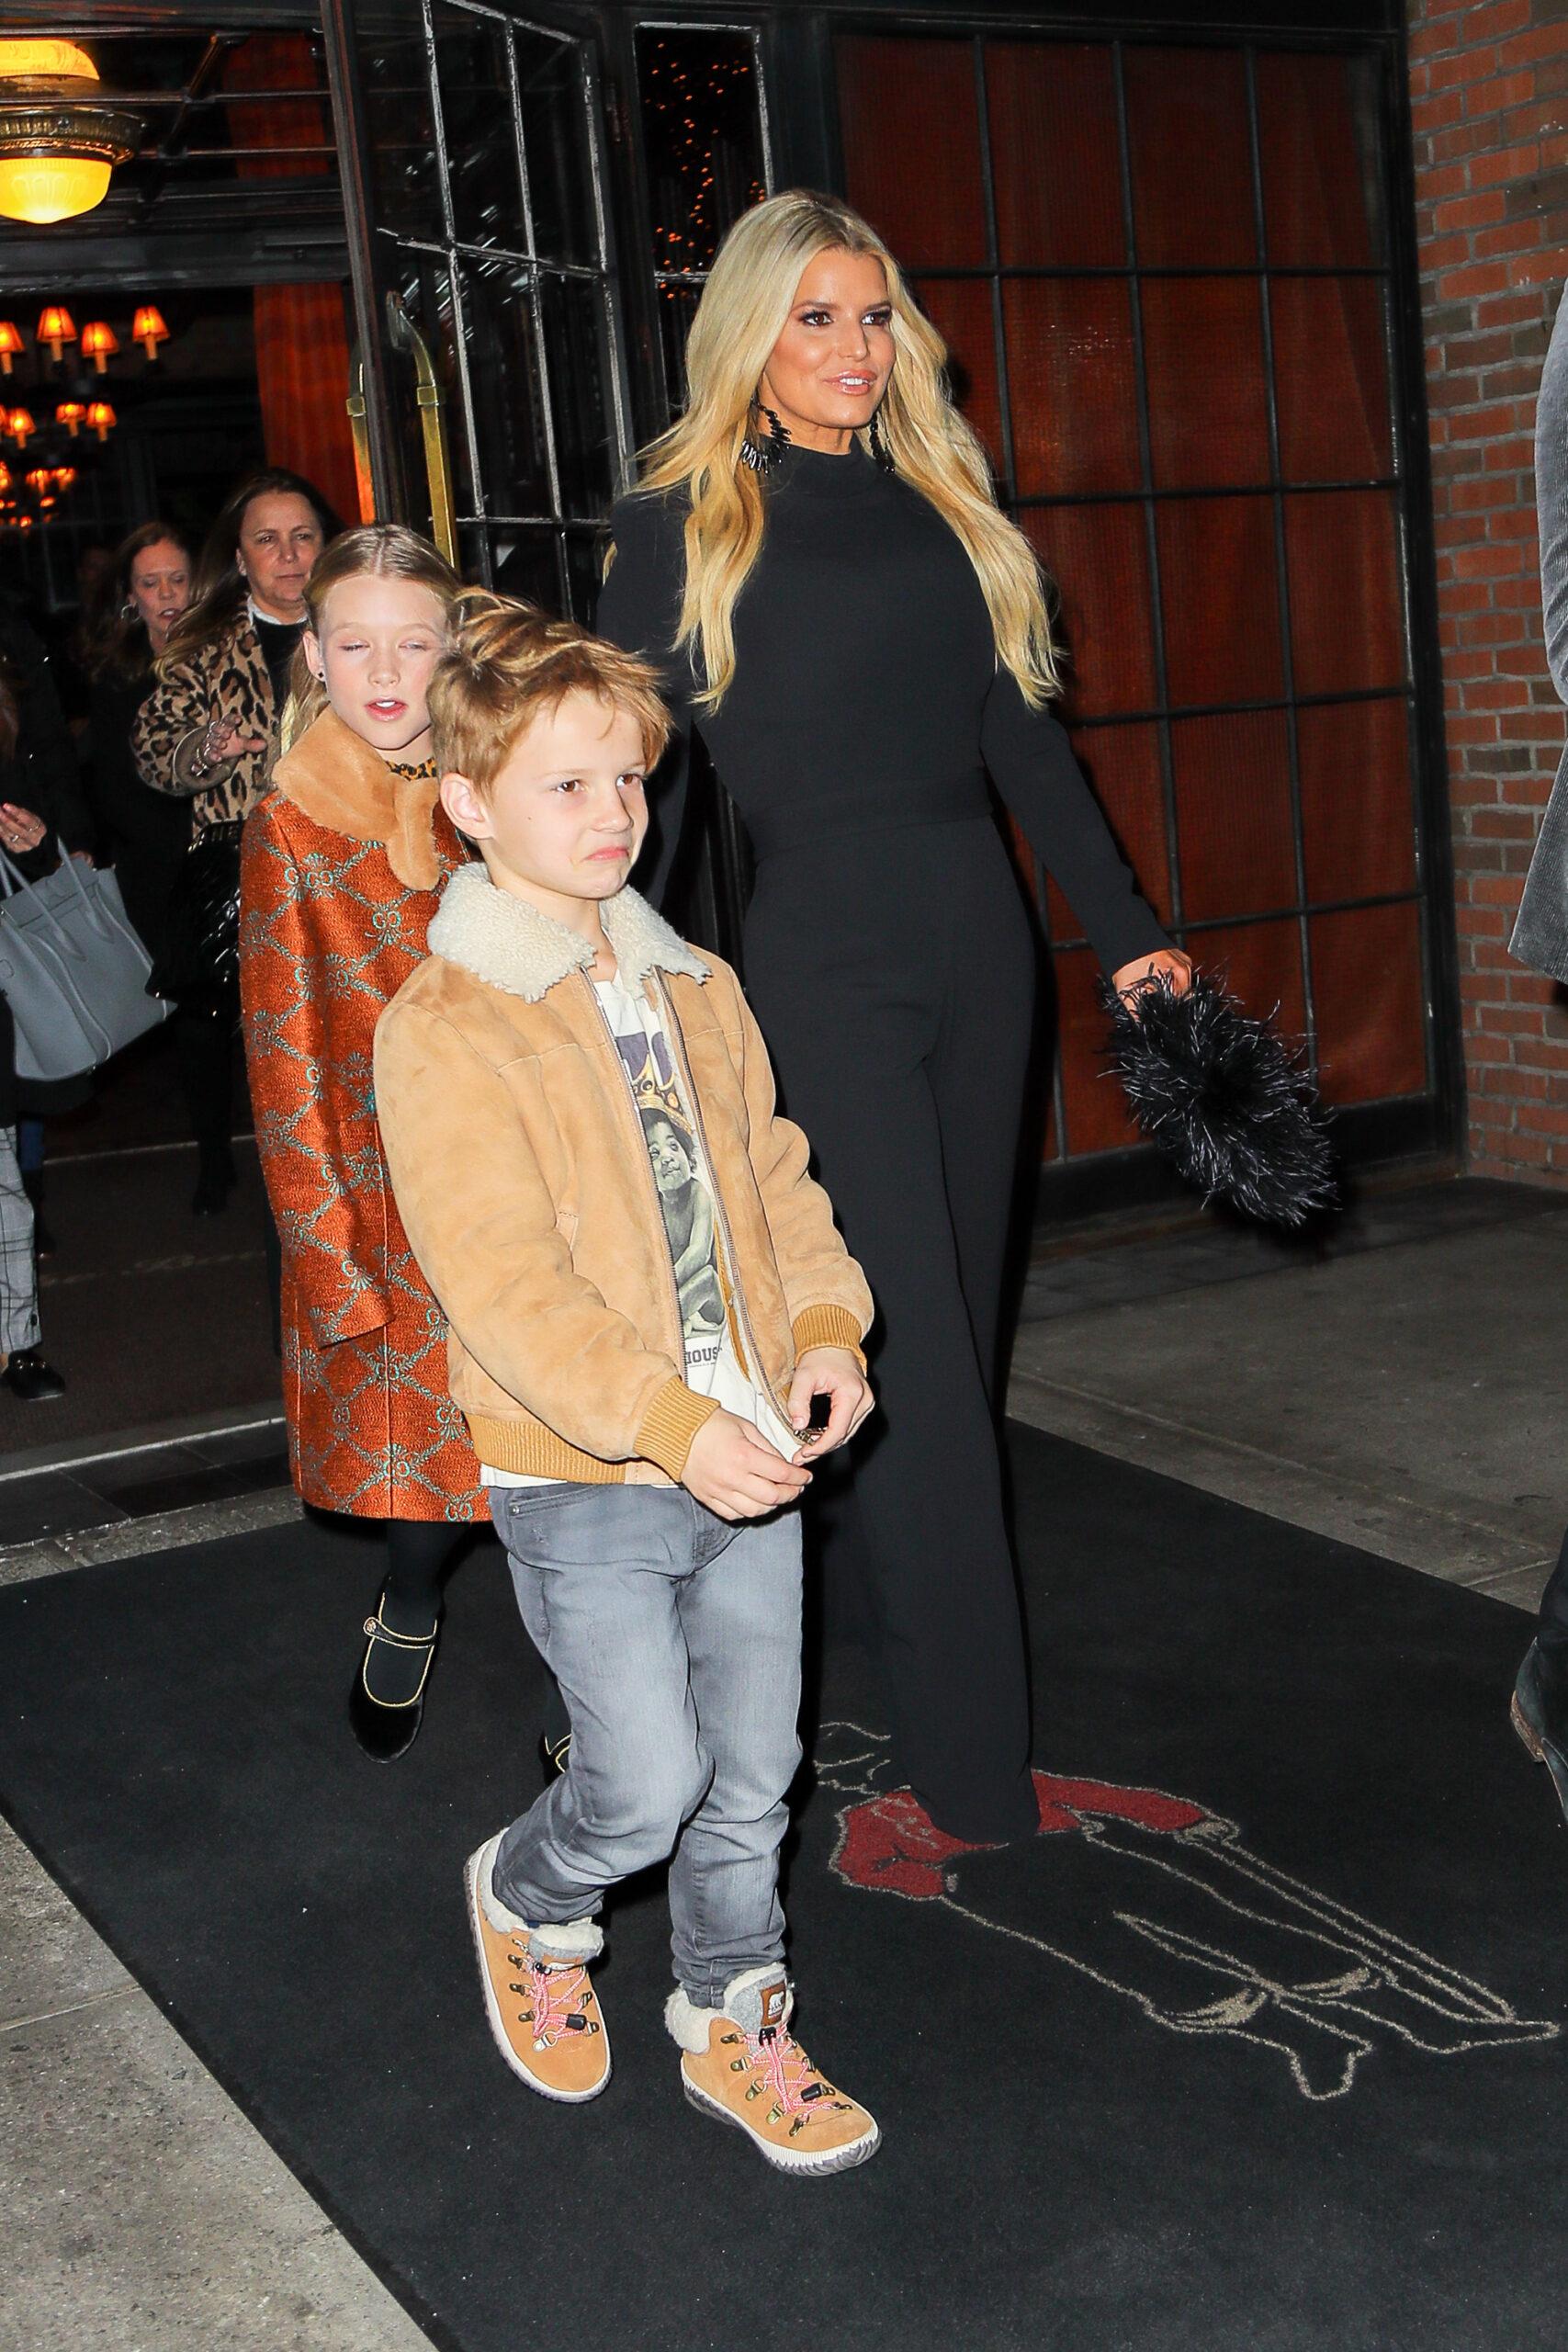 Jessica Simpson and Eric Johnson seen leaving with their kids in NYC on Feb 04 2020